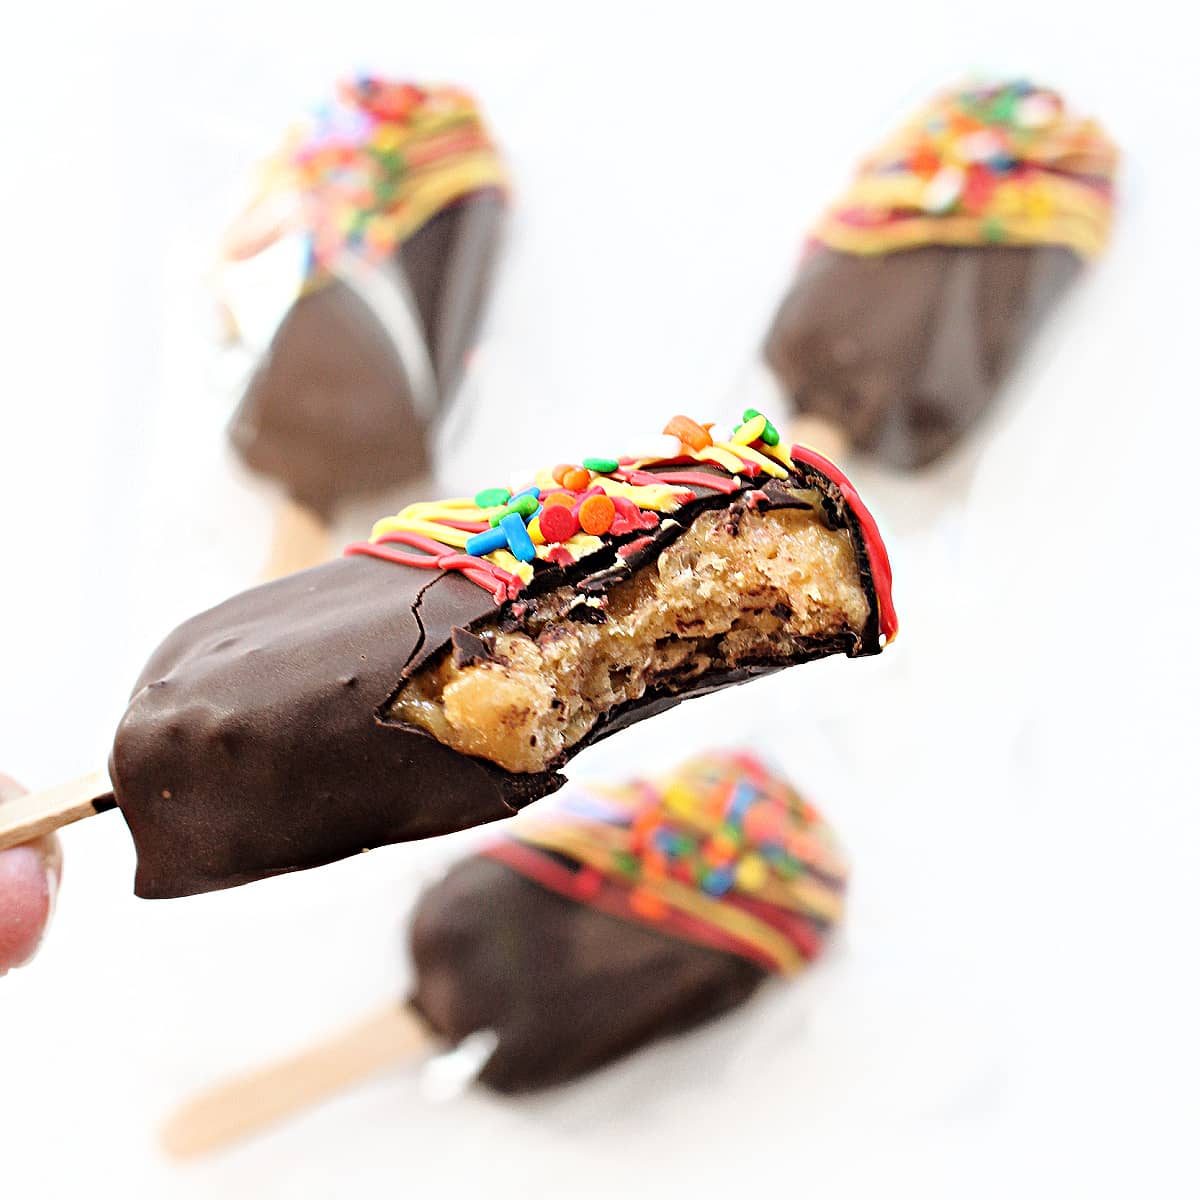 Closeup of chocolate dipped peanut chew pop with a bite taken out to show candy inside.